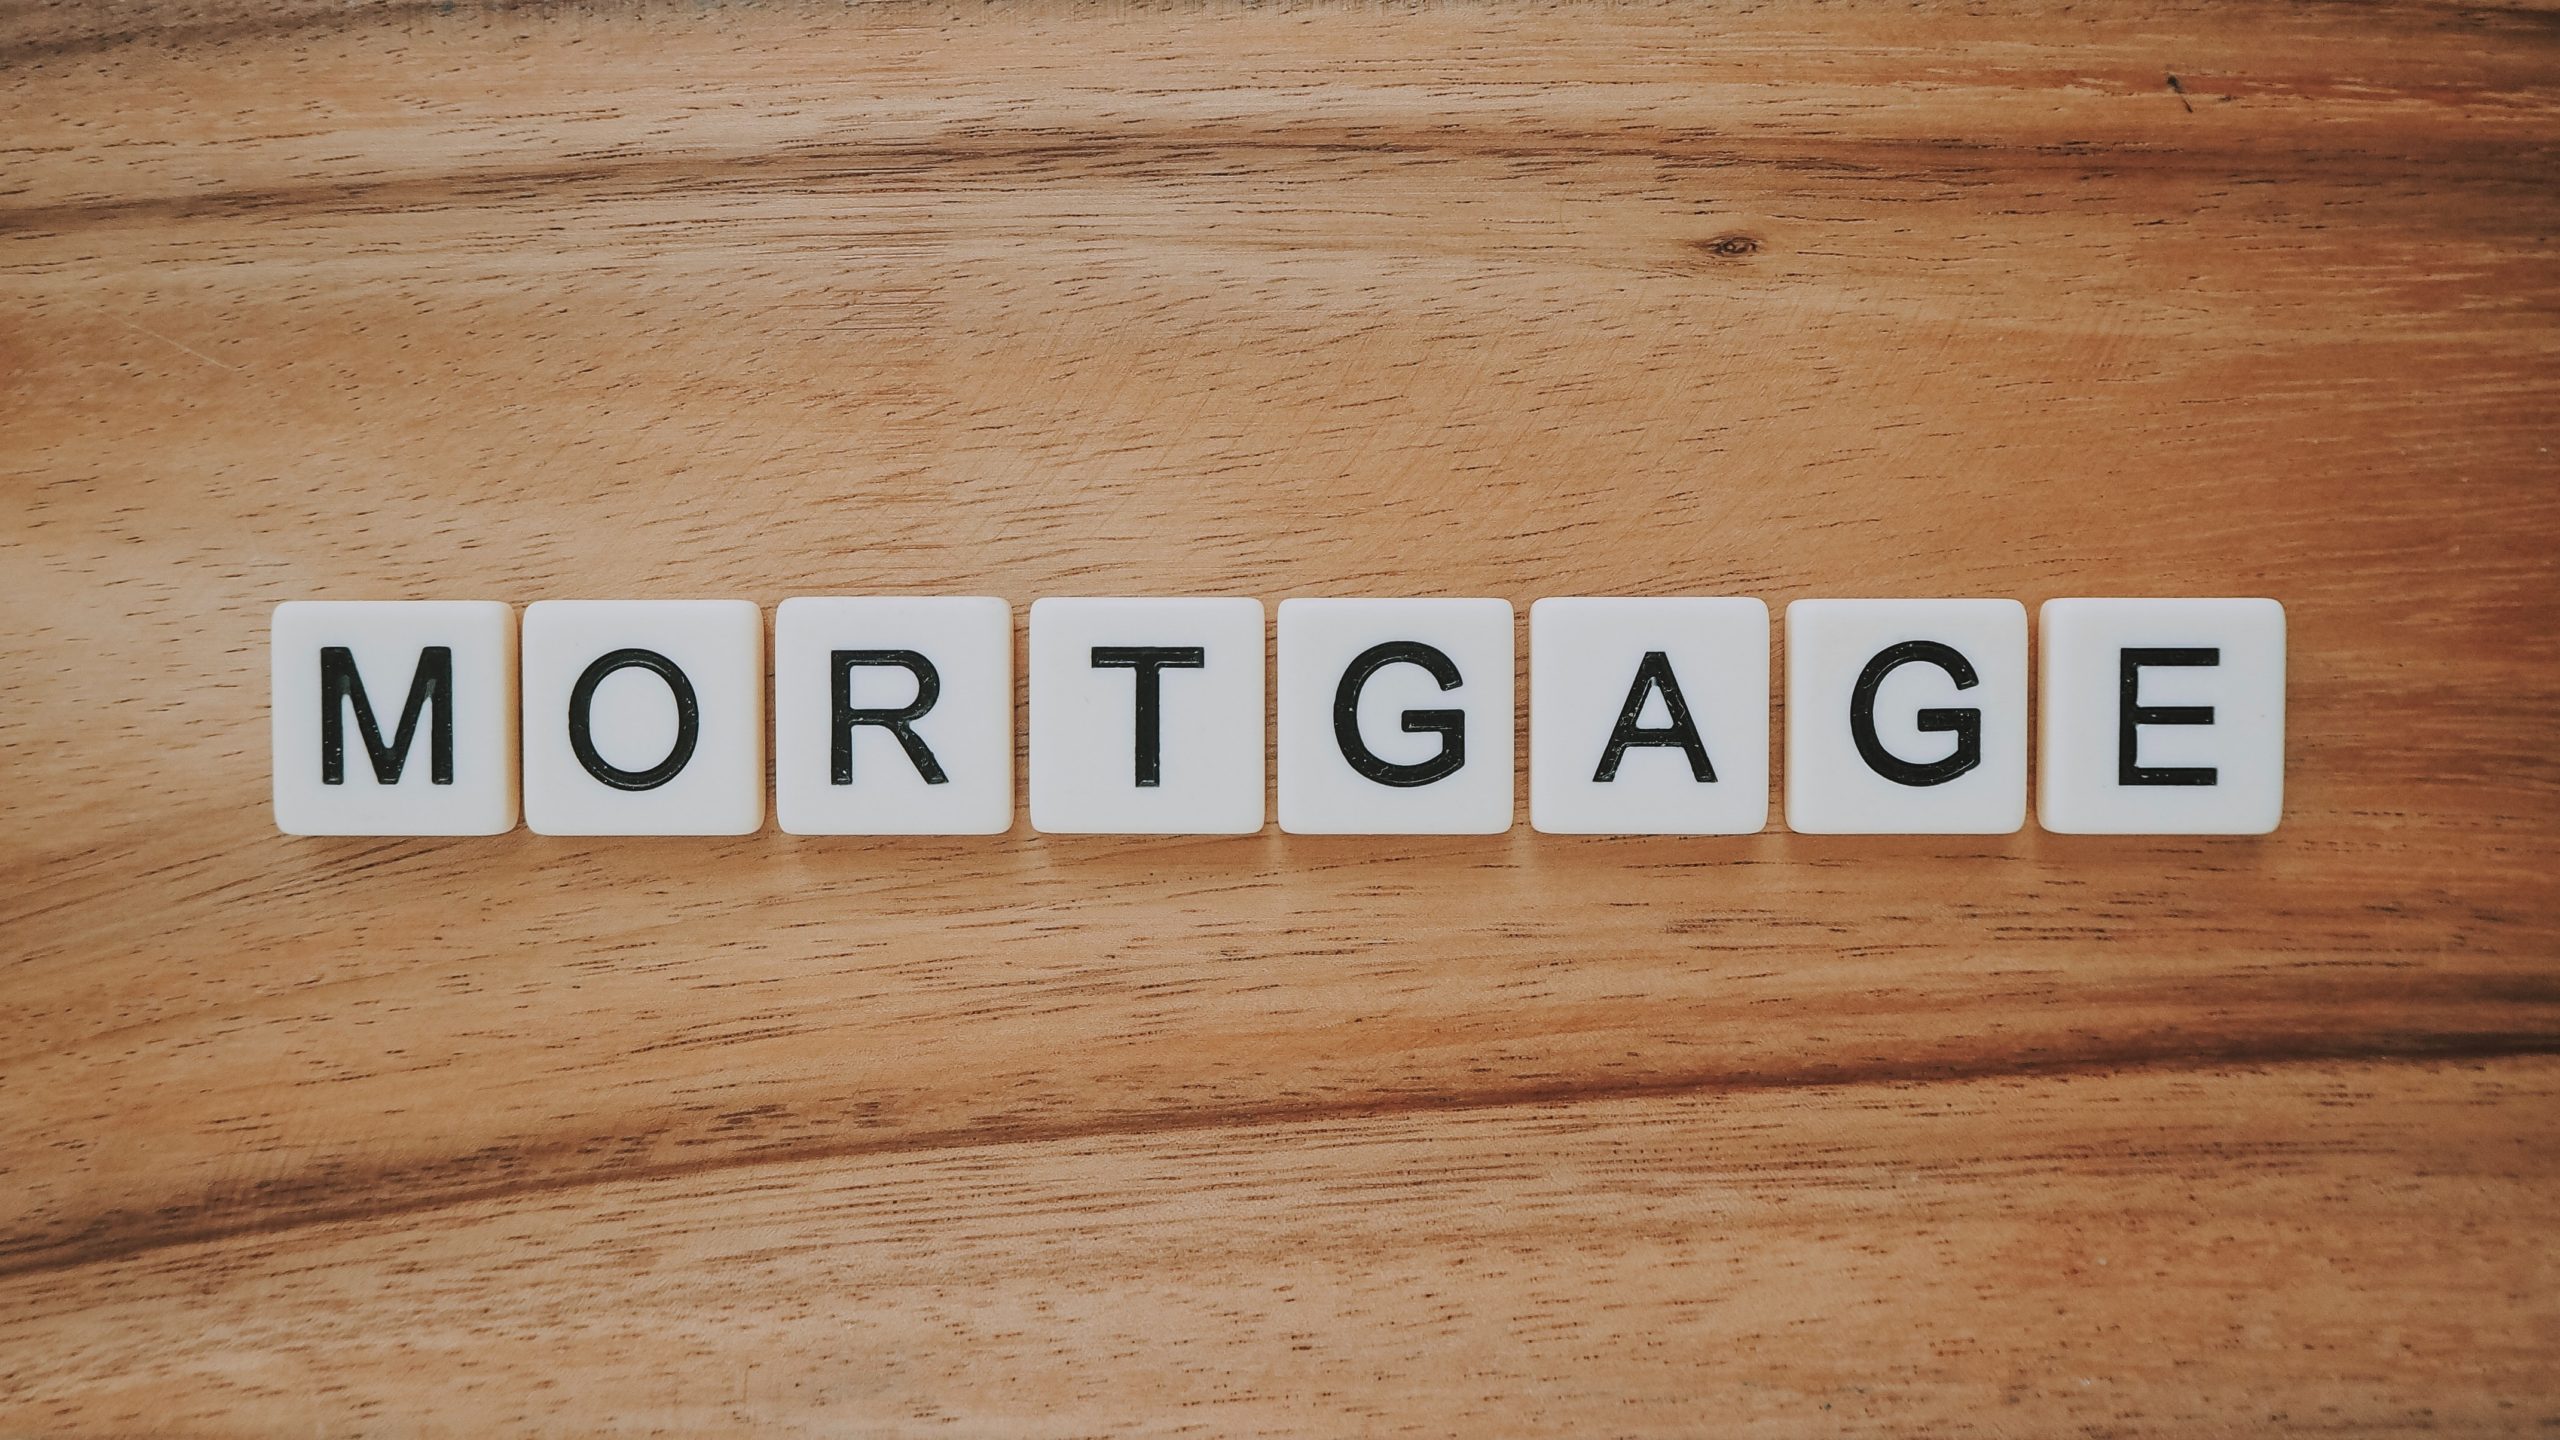 Mortgage 101: Top Tips for Getting a Mortgage